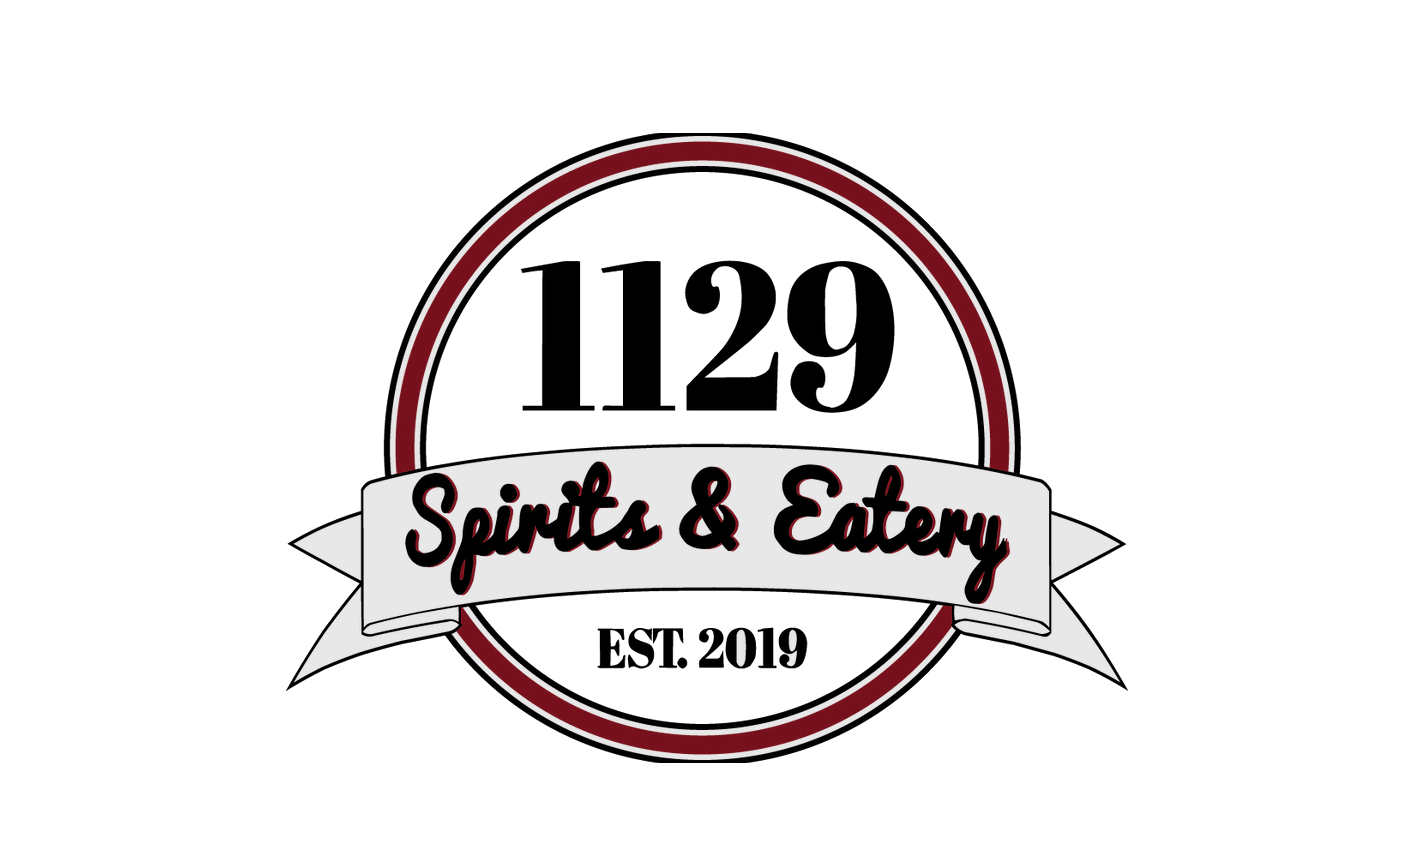 1129 Spirits and Eatery